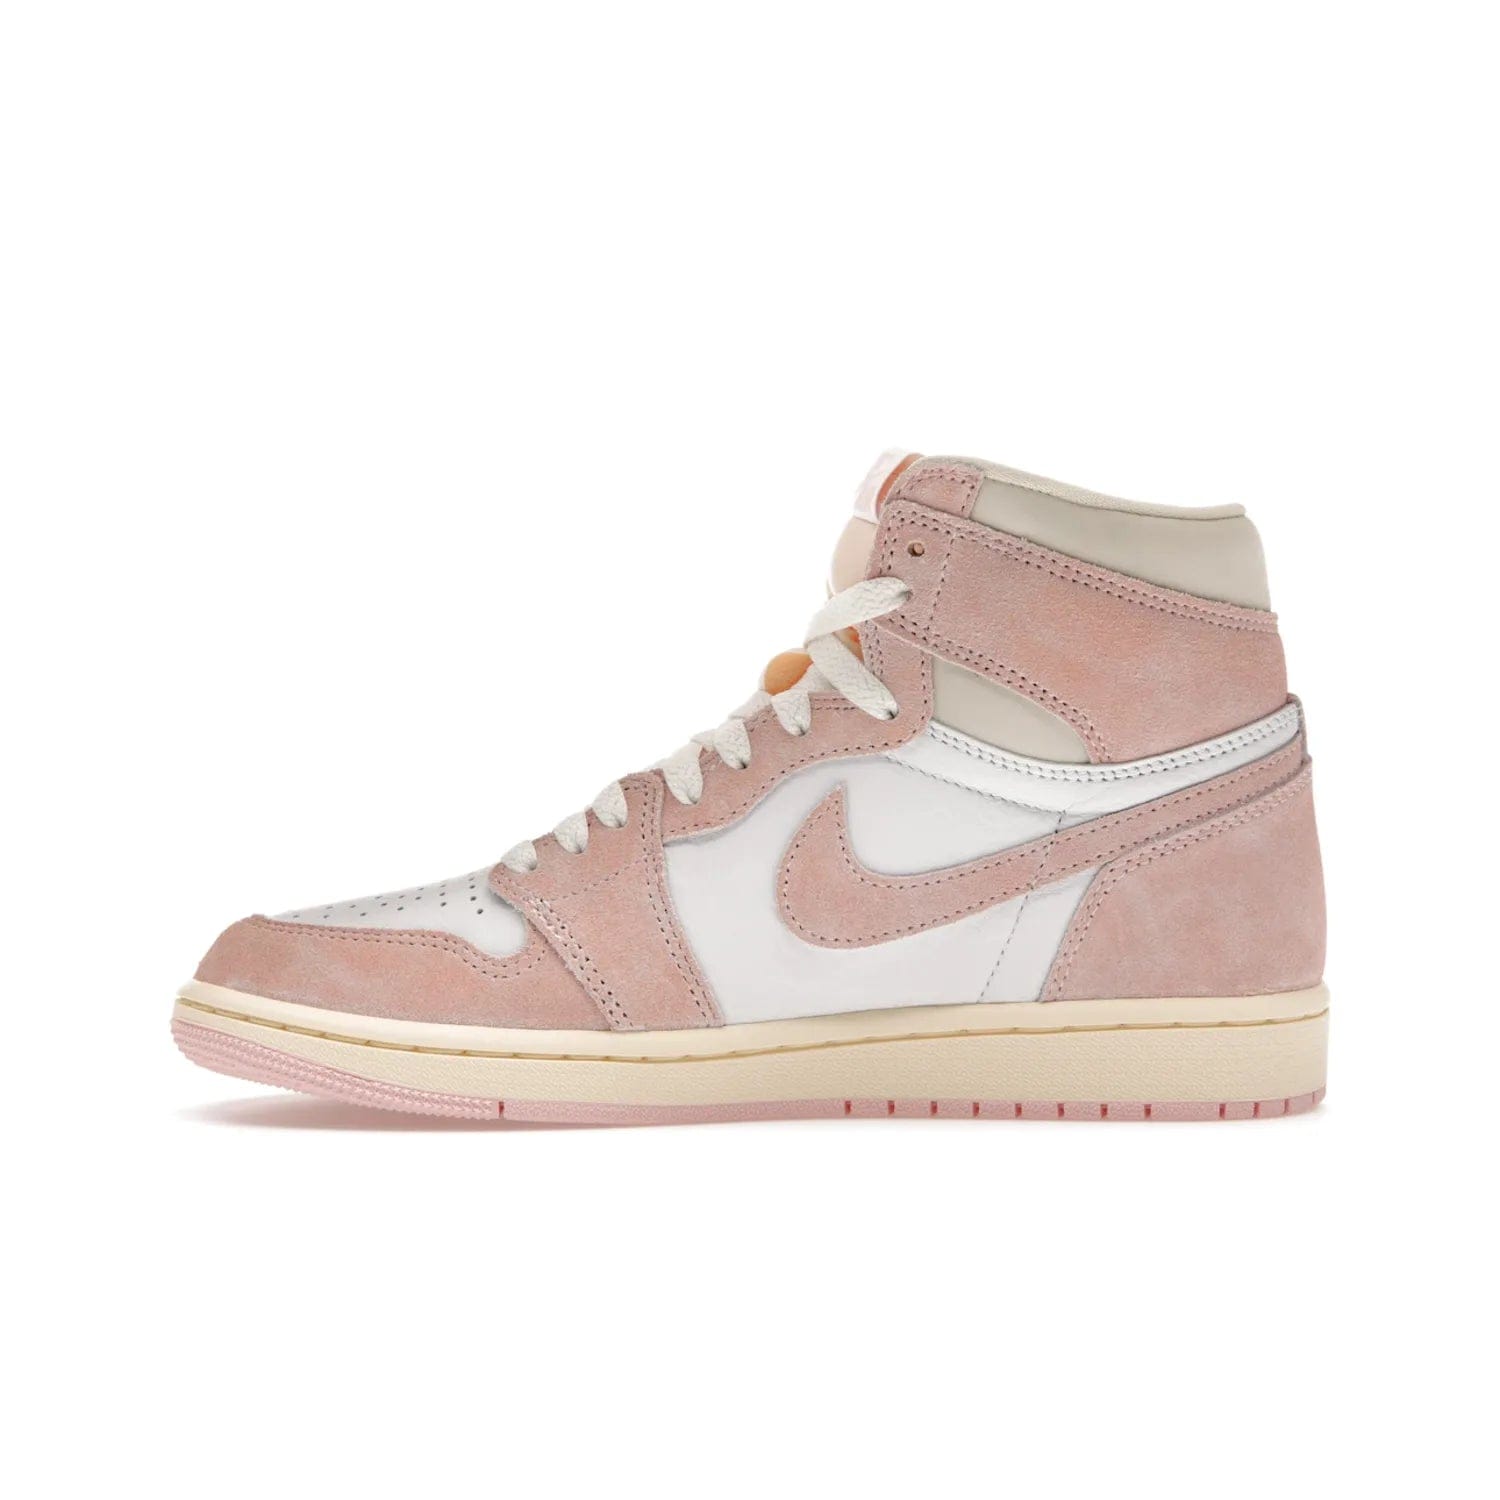 Jordan 1 Retro High OG Washed Pink (Women's) - Image 19 - Only at www.BallersClubKickz.com - Iconic Air Jordan 1 Retro High OG for women with unique pink suede and white leather uppers. Get the timeless look on April 22, 2023.